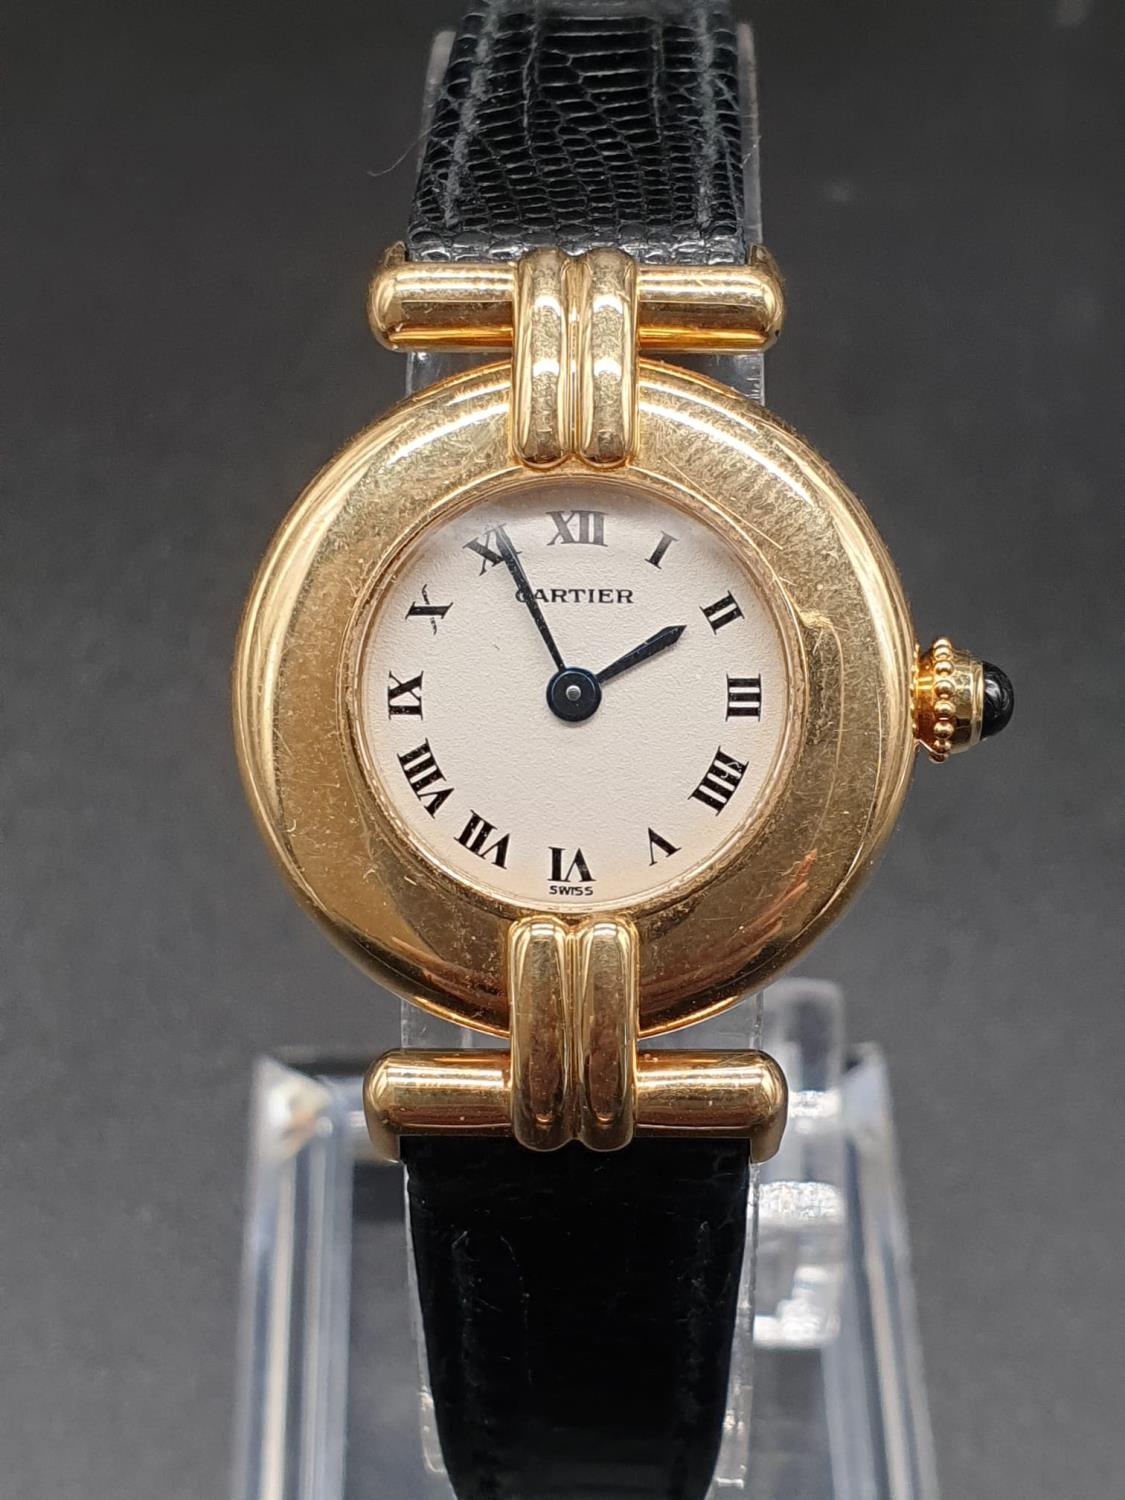 18k yellow gold Cartier quartz ladies watch, white round face and black leather strap